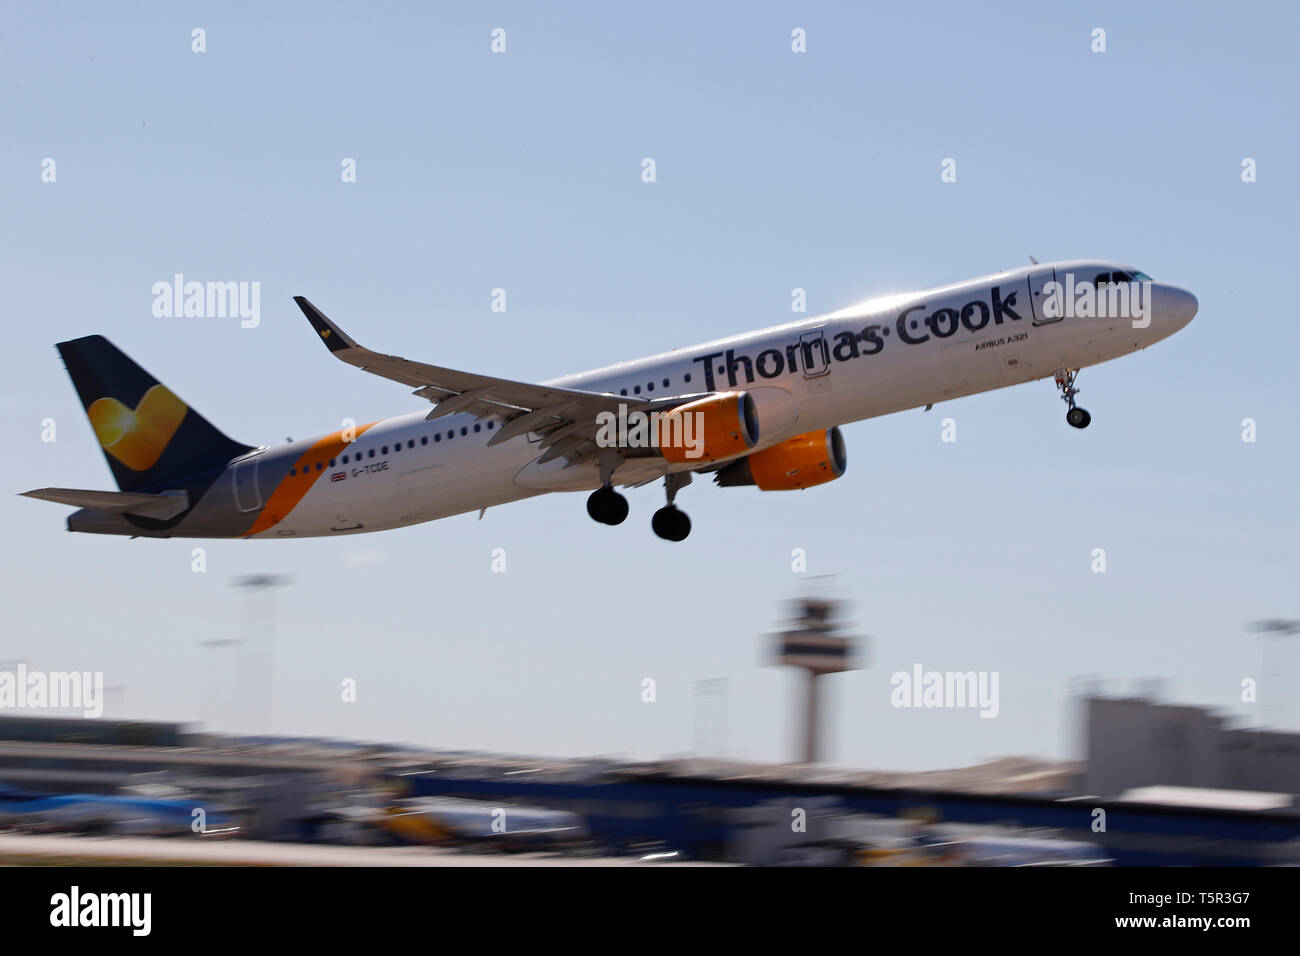 Palma, Spain. 27th Apr, 2019. A Thomas Cook plane takes off from ...